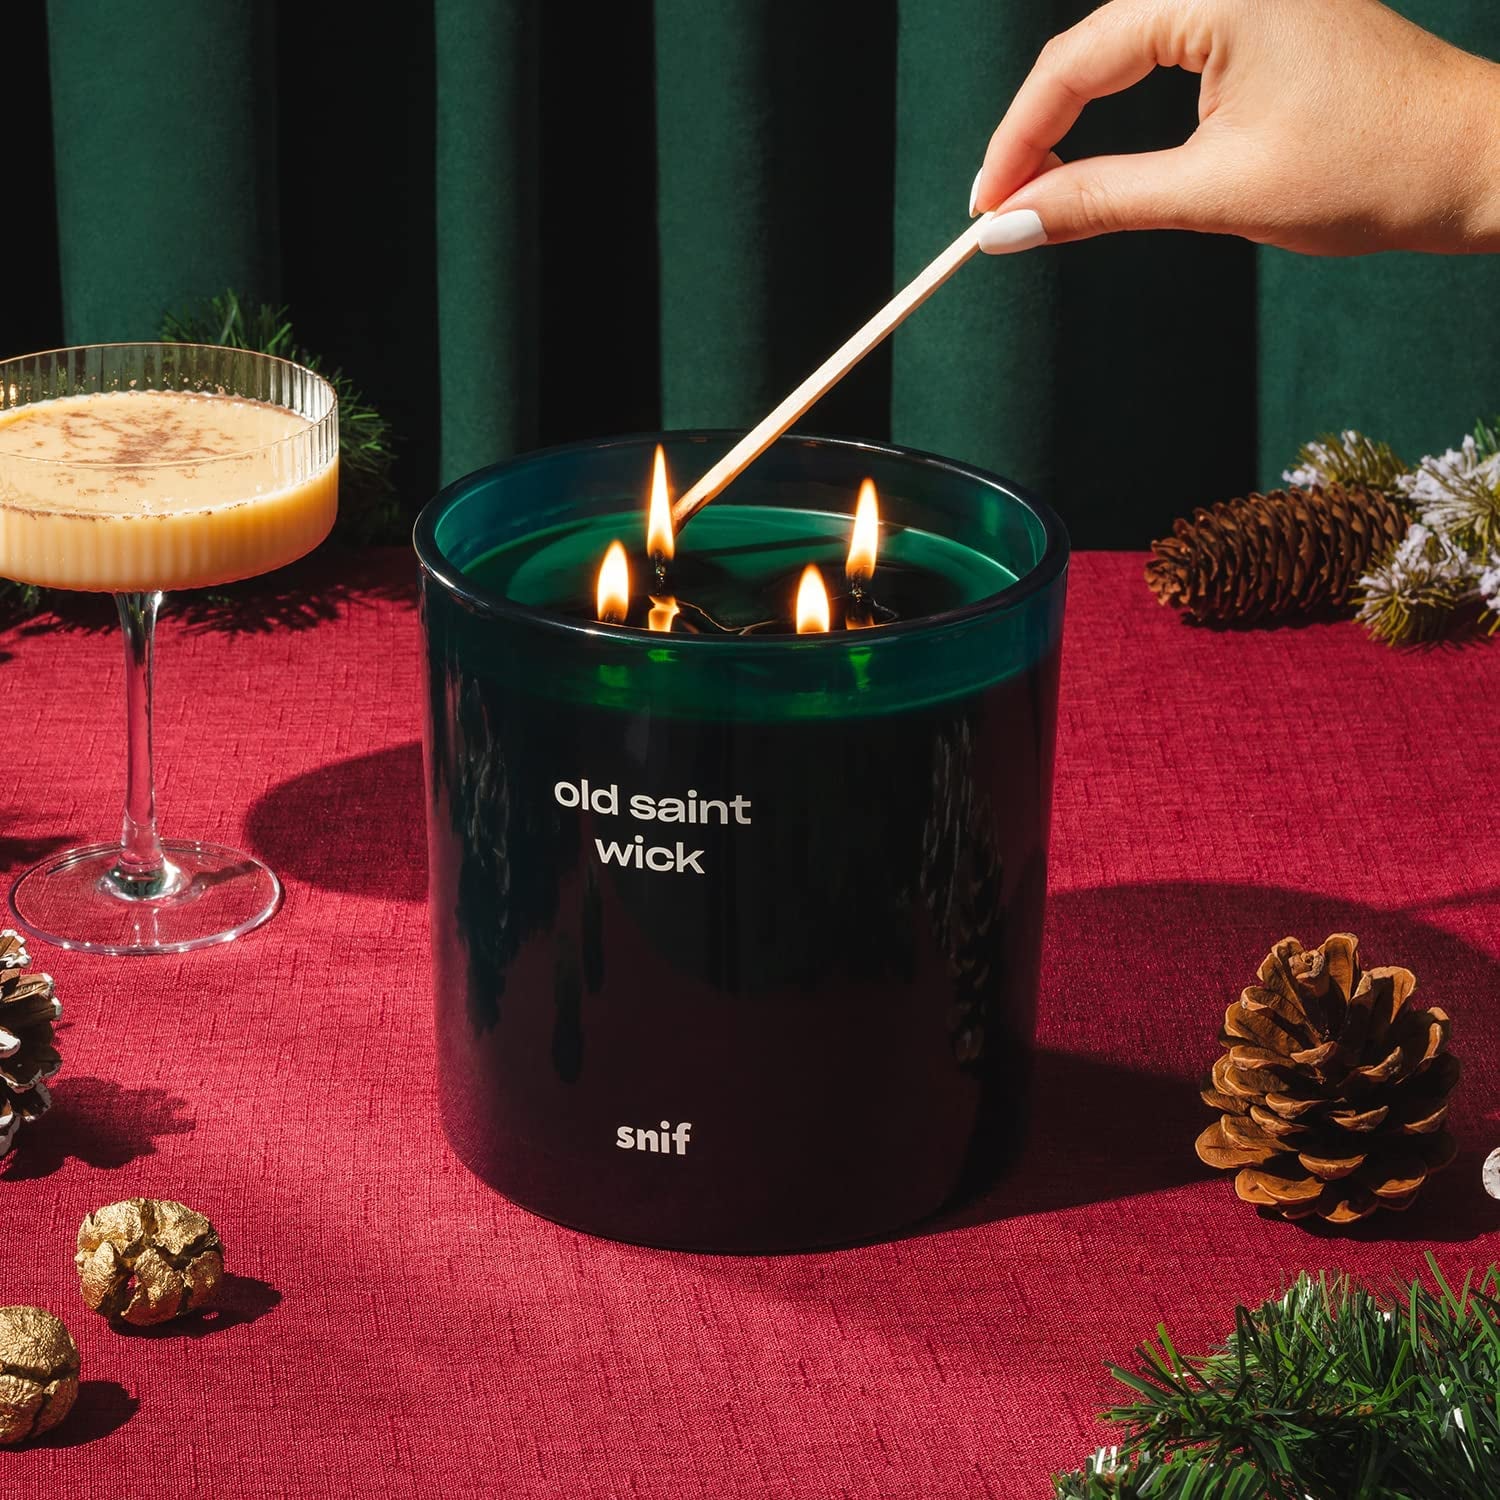 Image of the Snif Old Saint Wick scented candle.